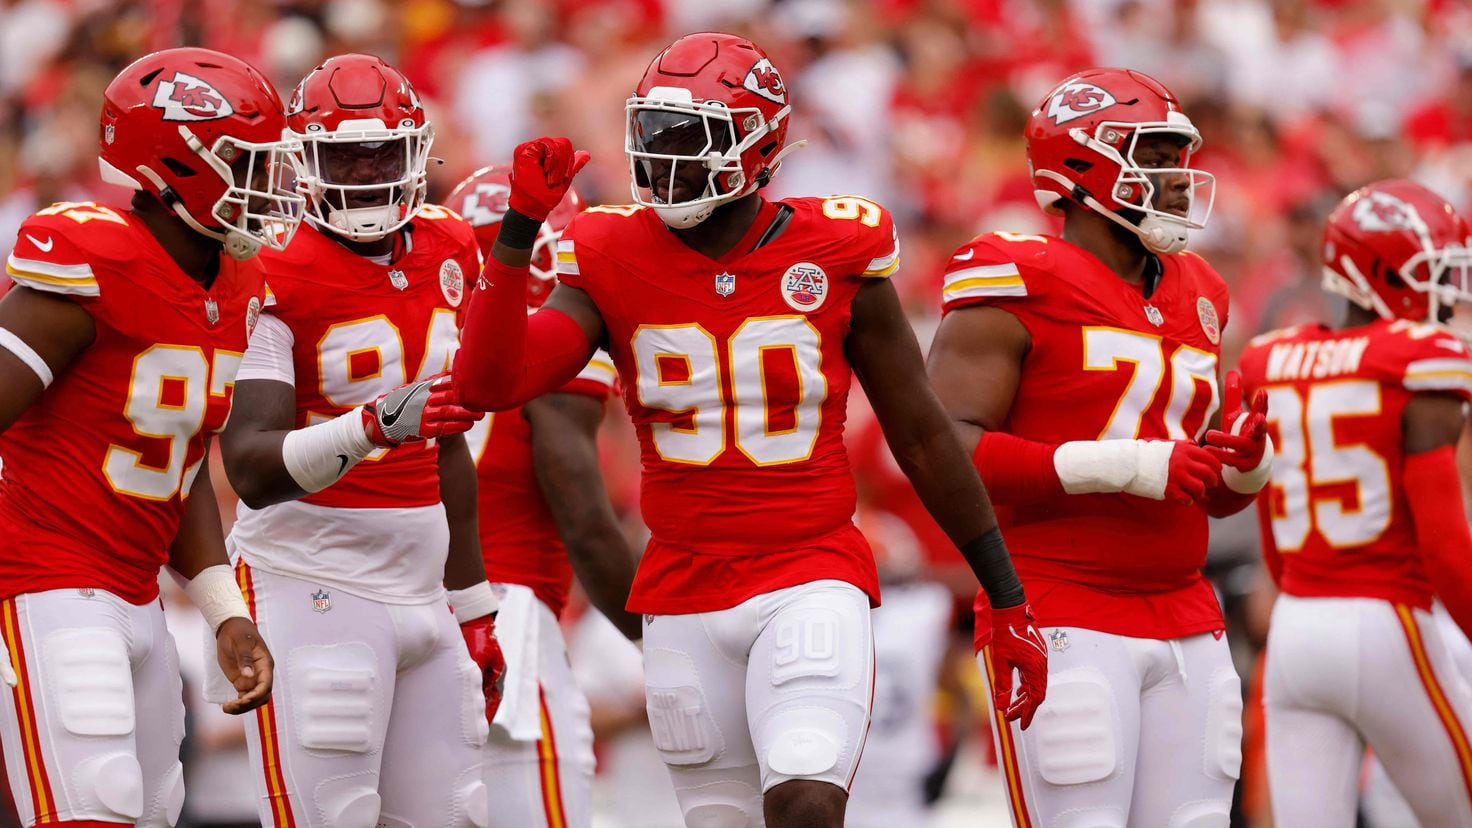 Lions vs Chiefs odds and predictions: Who is the favorite in the